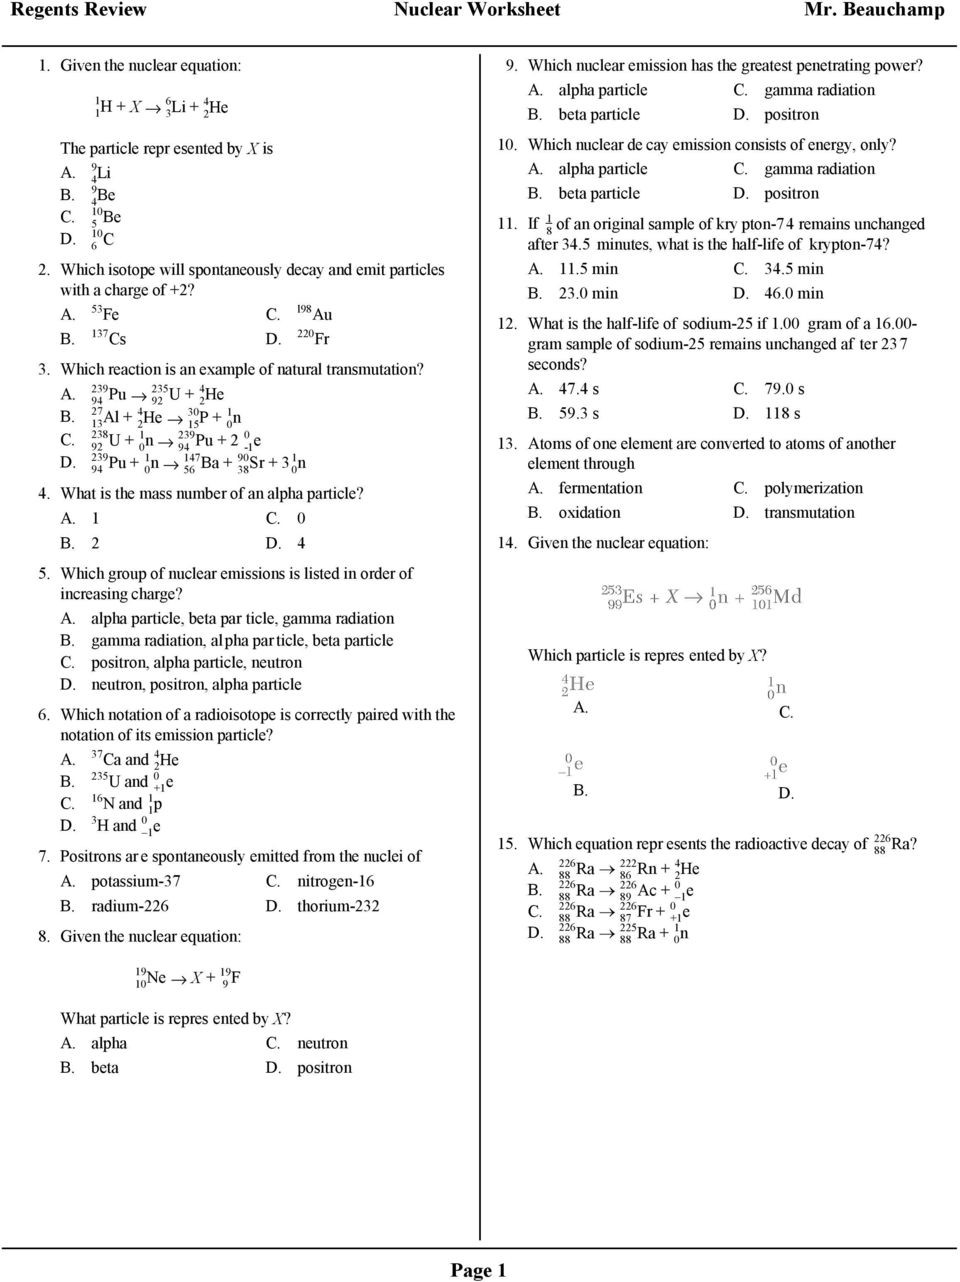 Nuclear Decay Worksheet Answer Key Regents Review Nuclear Worksheet Mr Beauchamp Pdf Free